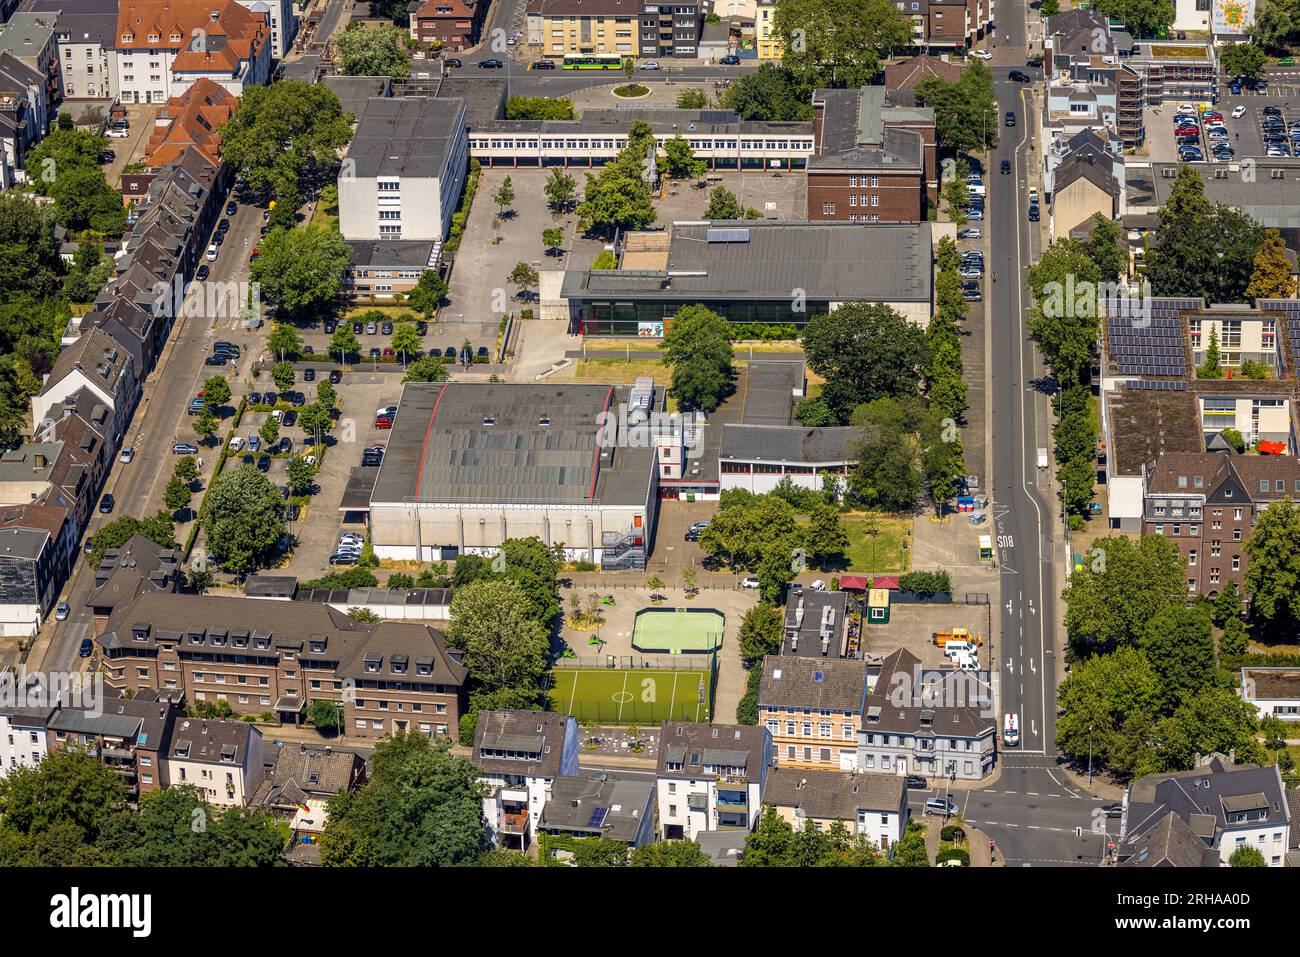 Aerial view, Anne-Frank-Realschule, Willy-Jürissen-Halle, indoor swimming pool, city center, Oberhausen, Ruhr area, North Rhine-Westphalia, Germany, E Stock Photo